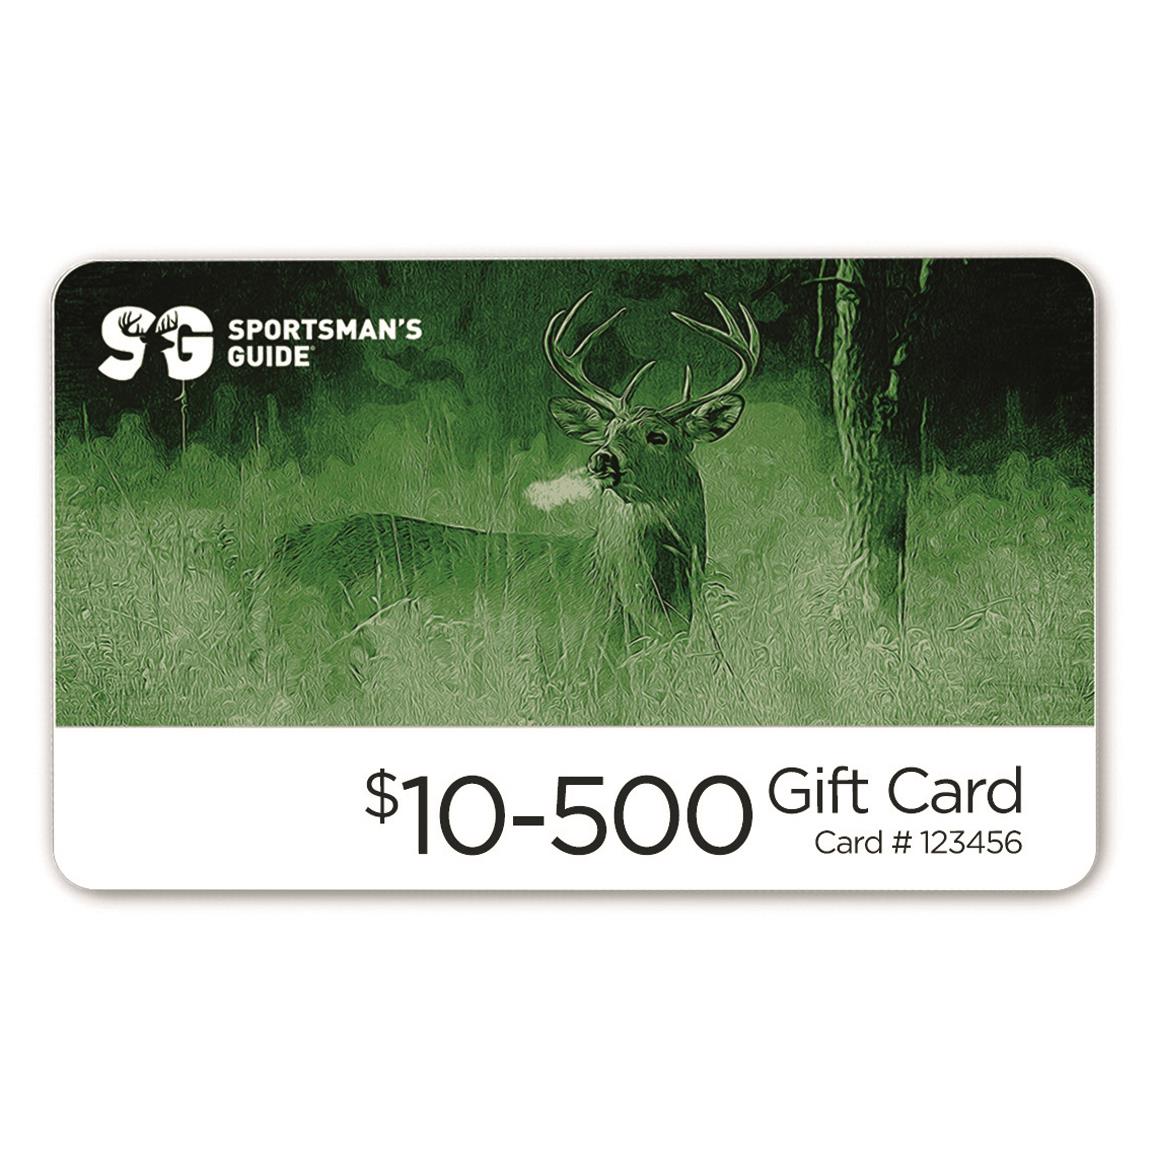 Sportsman's Guide Gift Cards, Gift Card